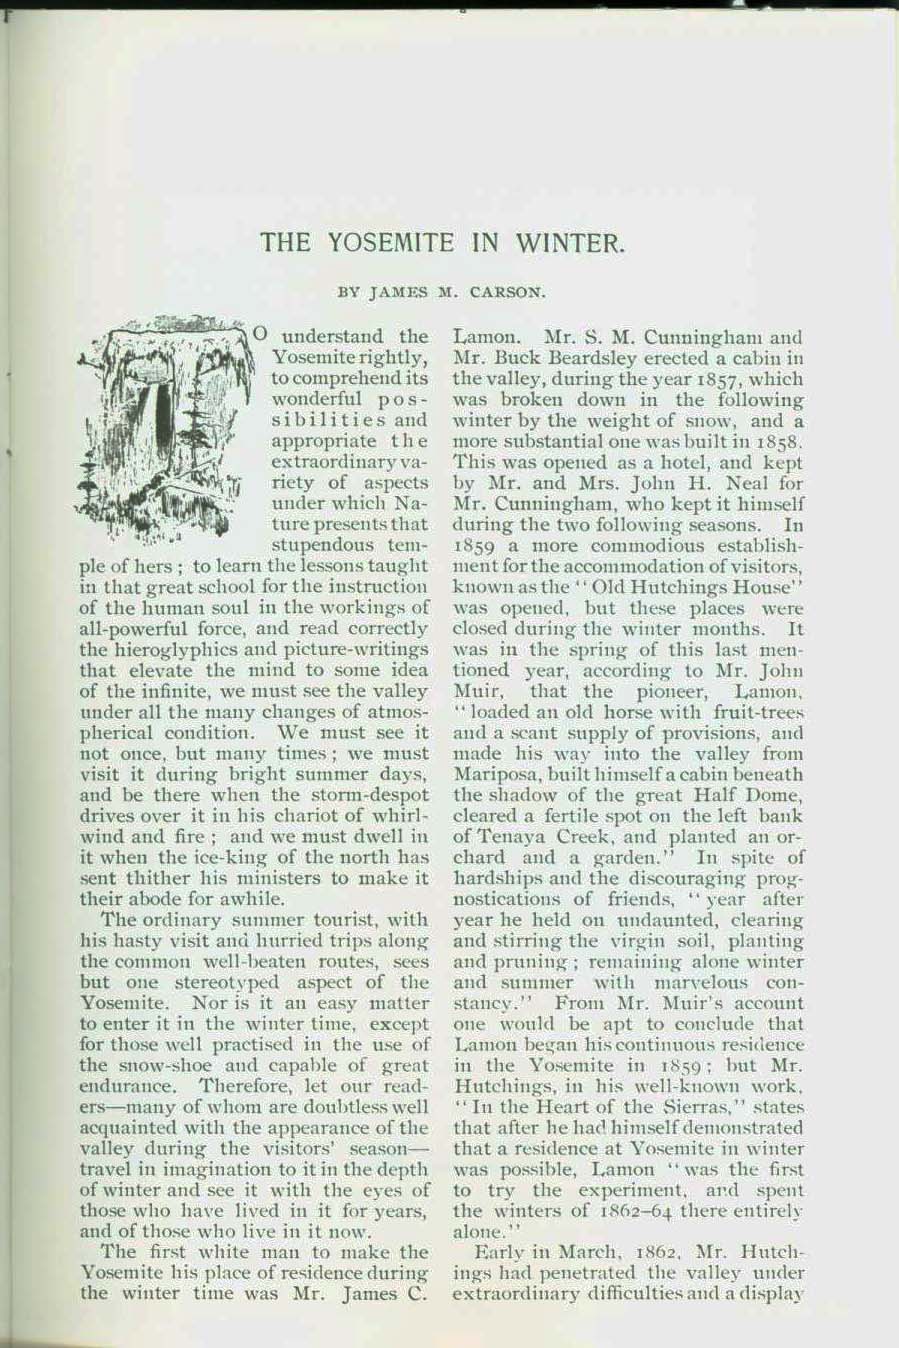 THE YOSEMITE IN WINTER: an 1892 account. vikst0053b